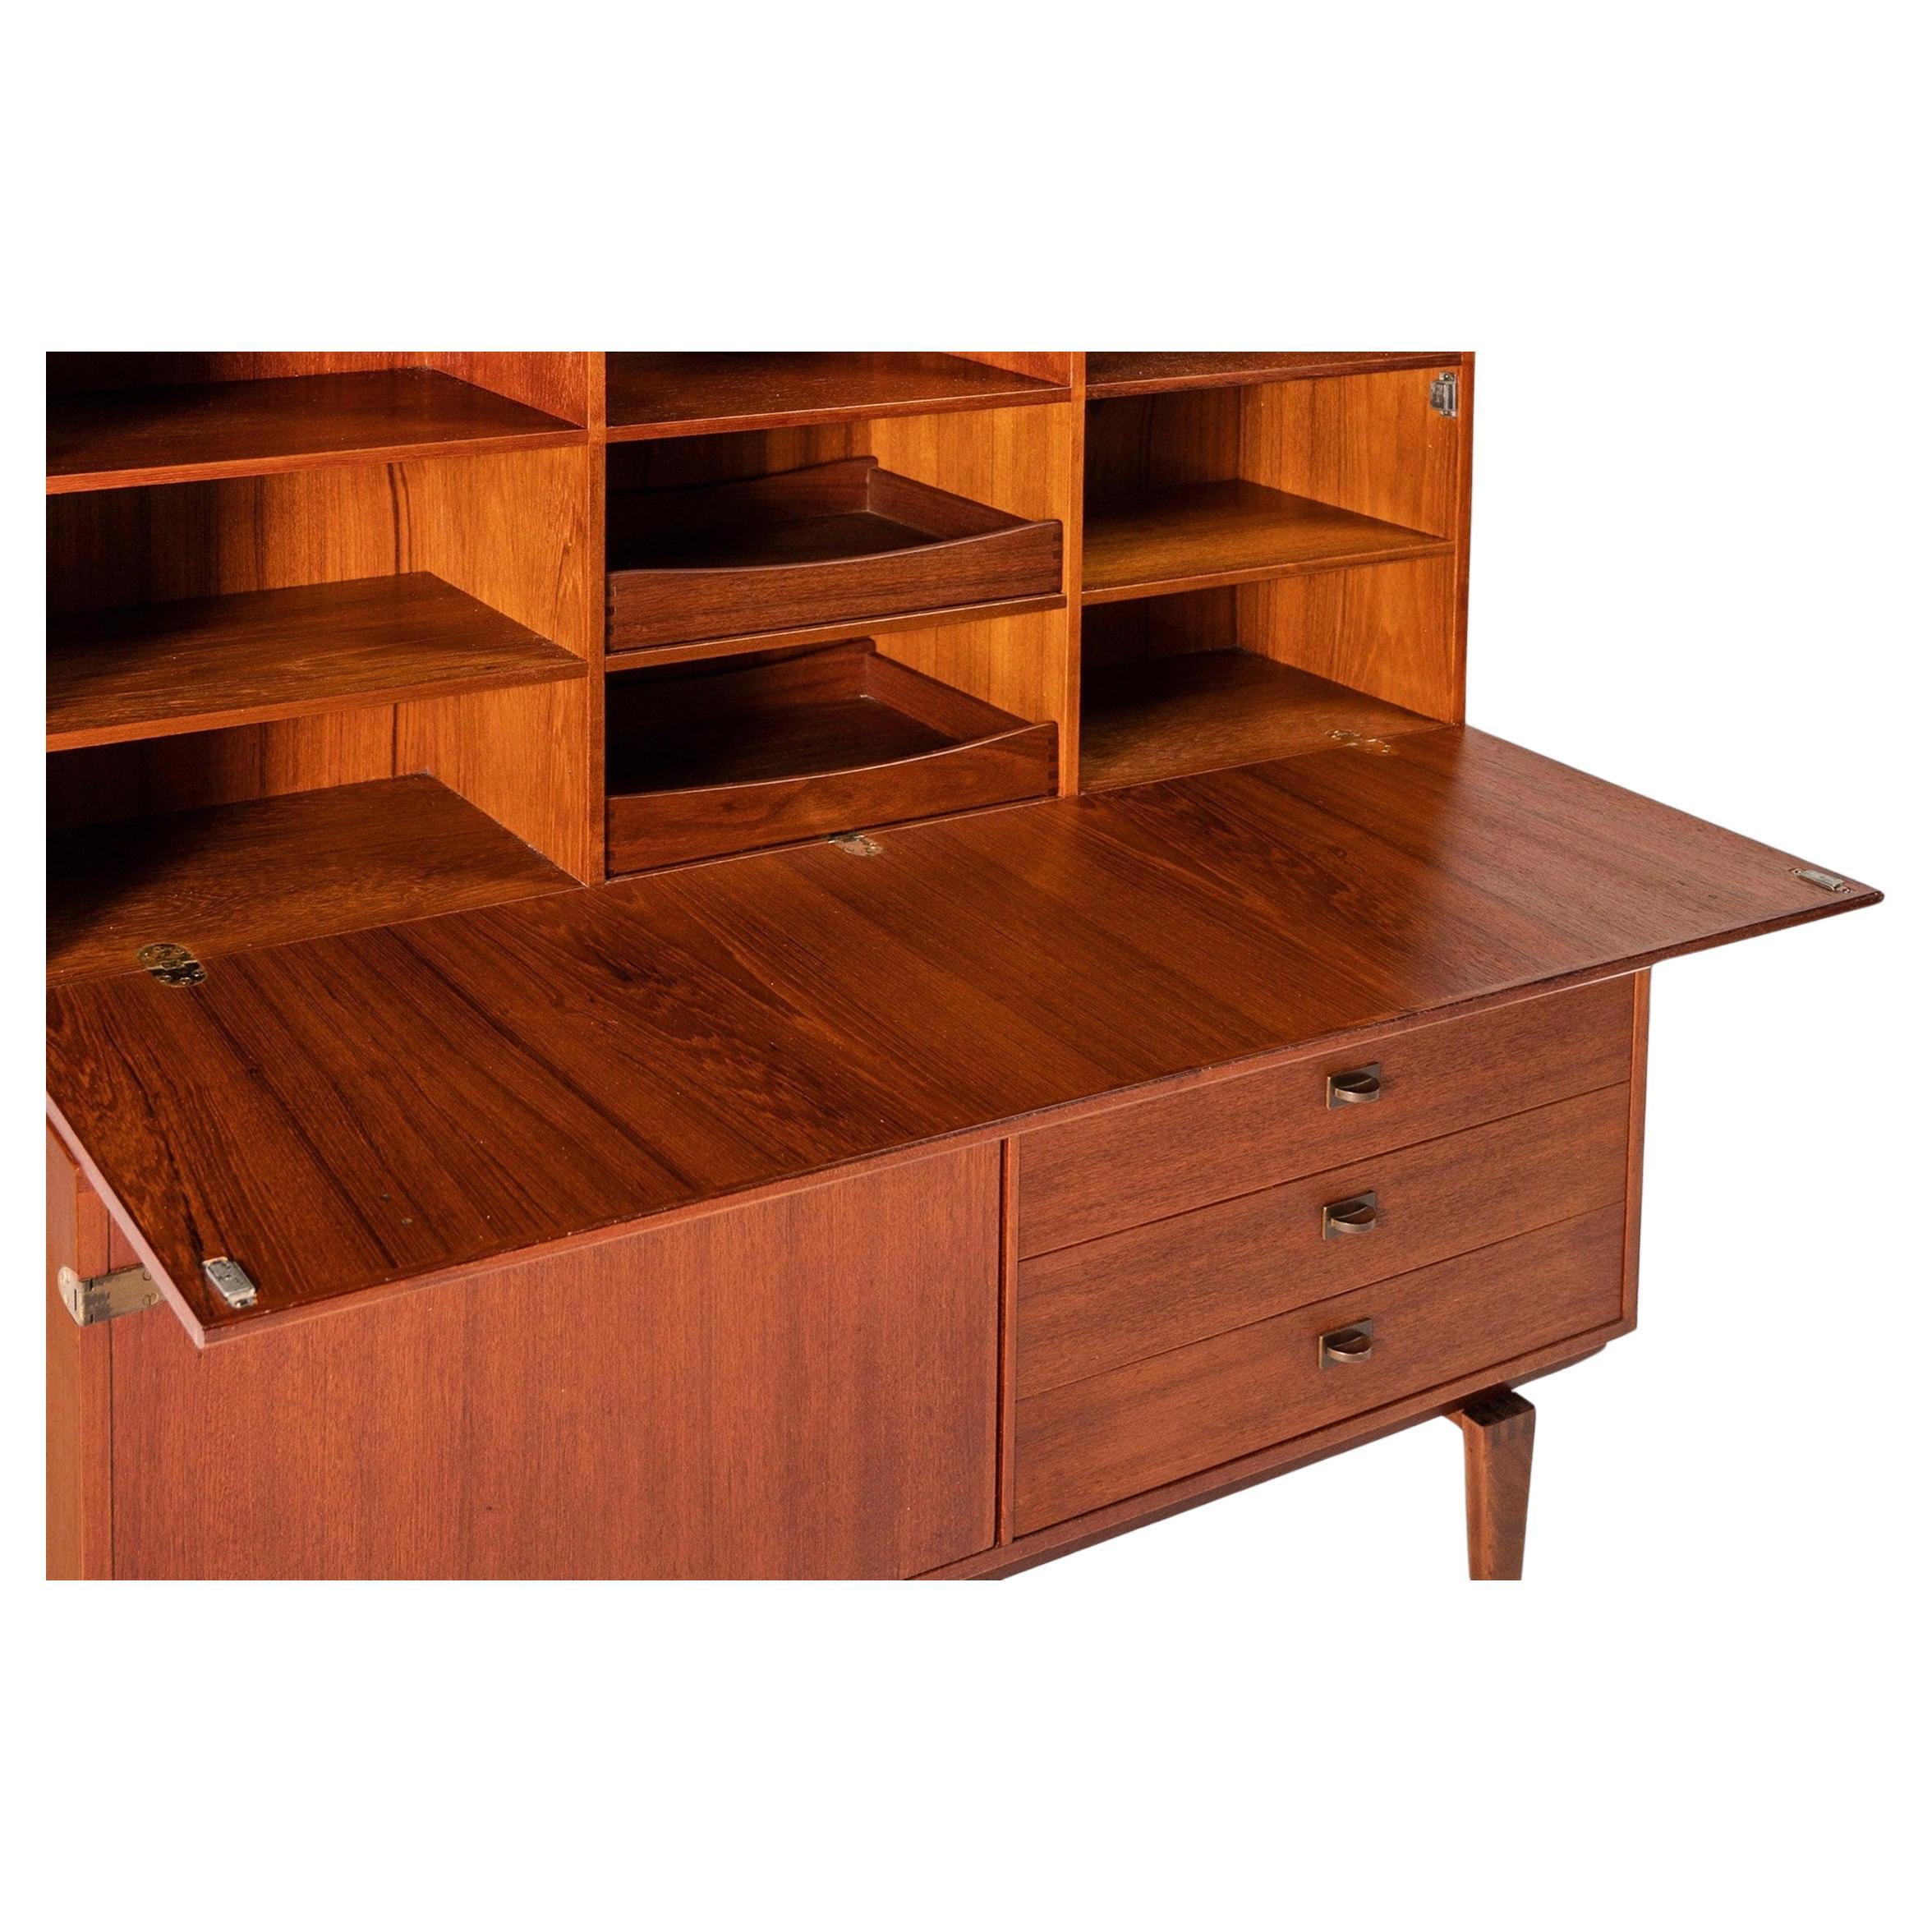 Beautiful mid century Danish modern credenza with flip down desk and shelf unit designed by Lovig for Dansk. Nice flip down desk area with cubbies and drawers. Teak upper bookcase unit with shelves on top of lower teak credenza with one cabinet door